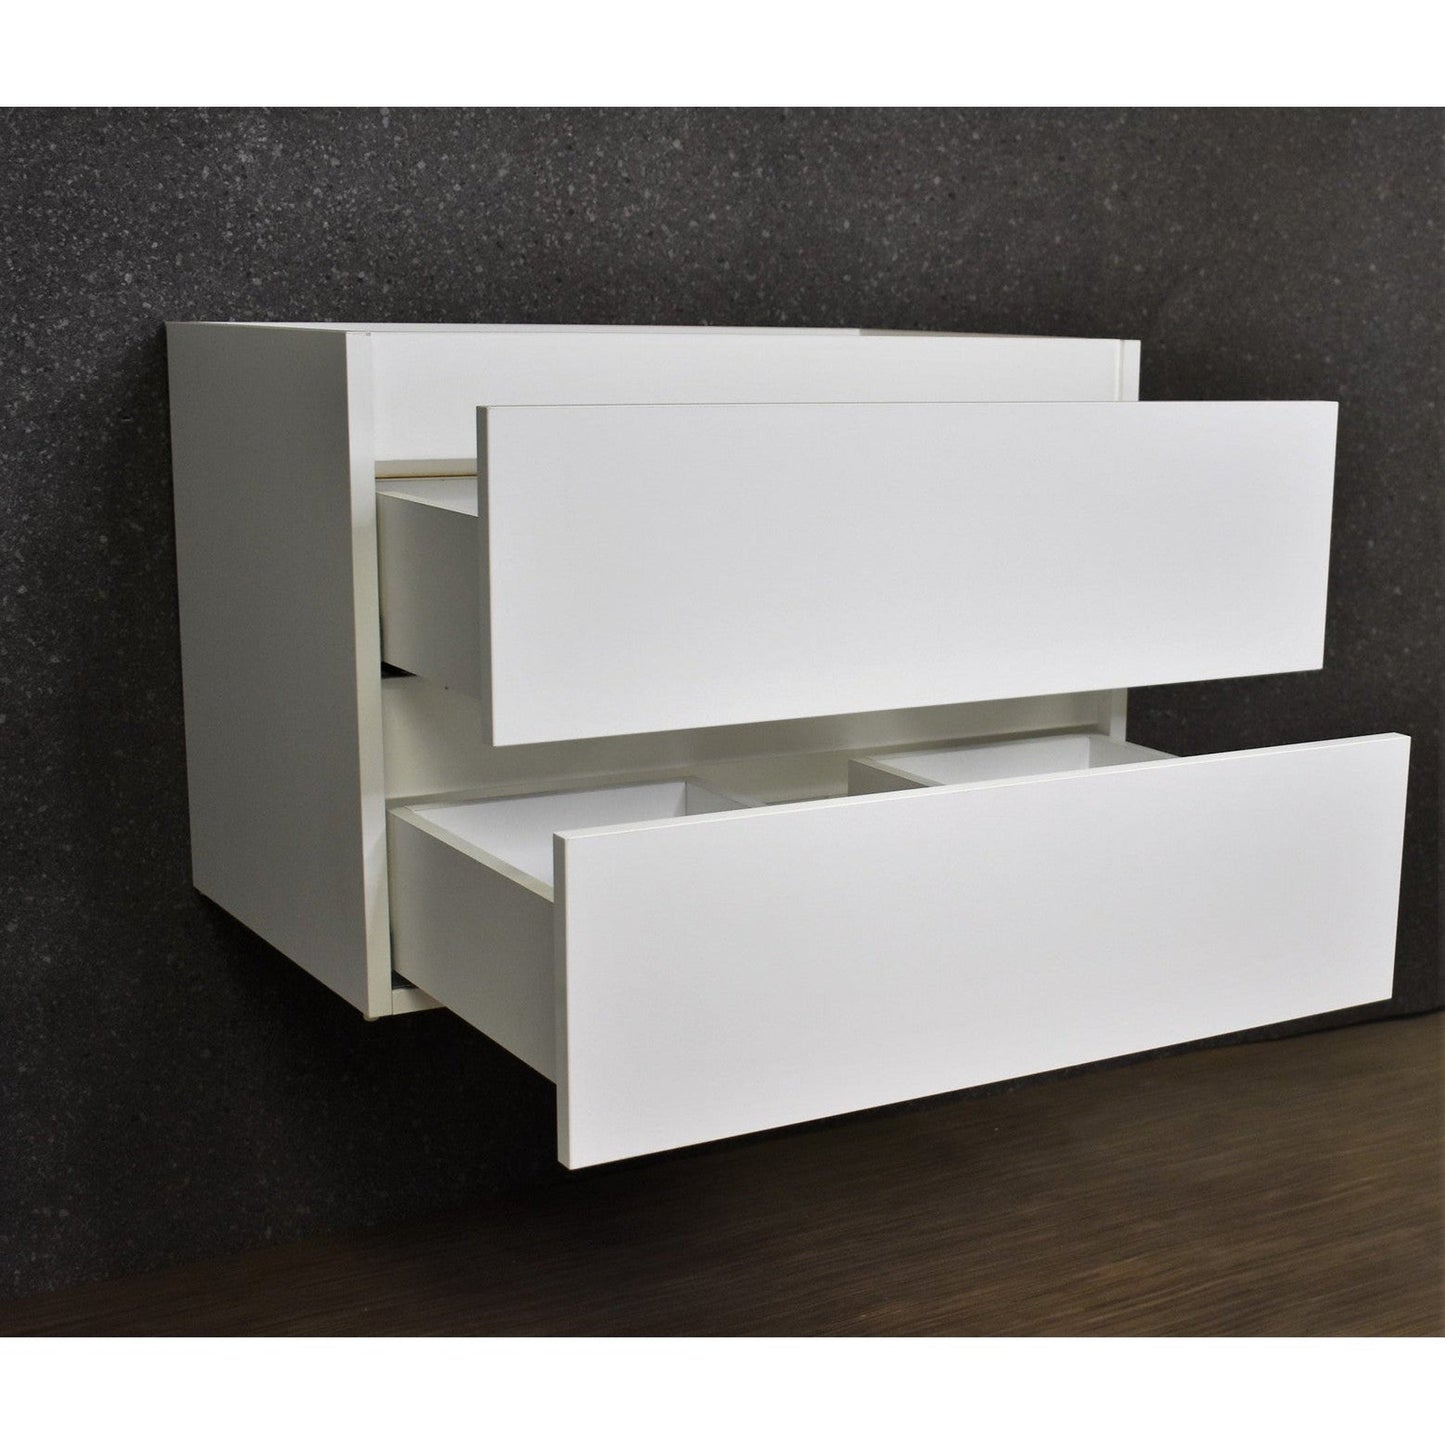 Volpa USA Salt 24" x 20" Glossy White Wall-Mounted Floating Bathroom Vanity Cabinet with Drawers